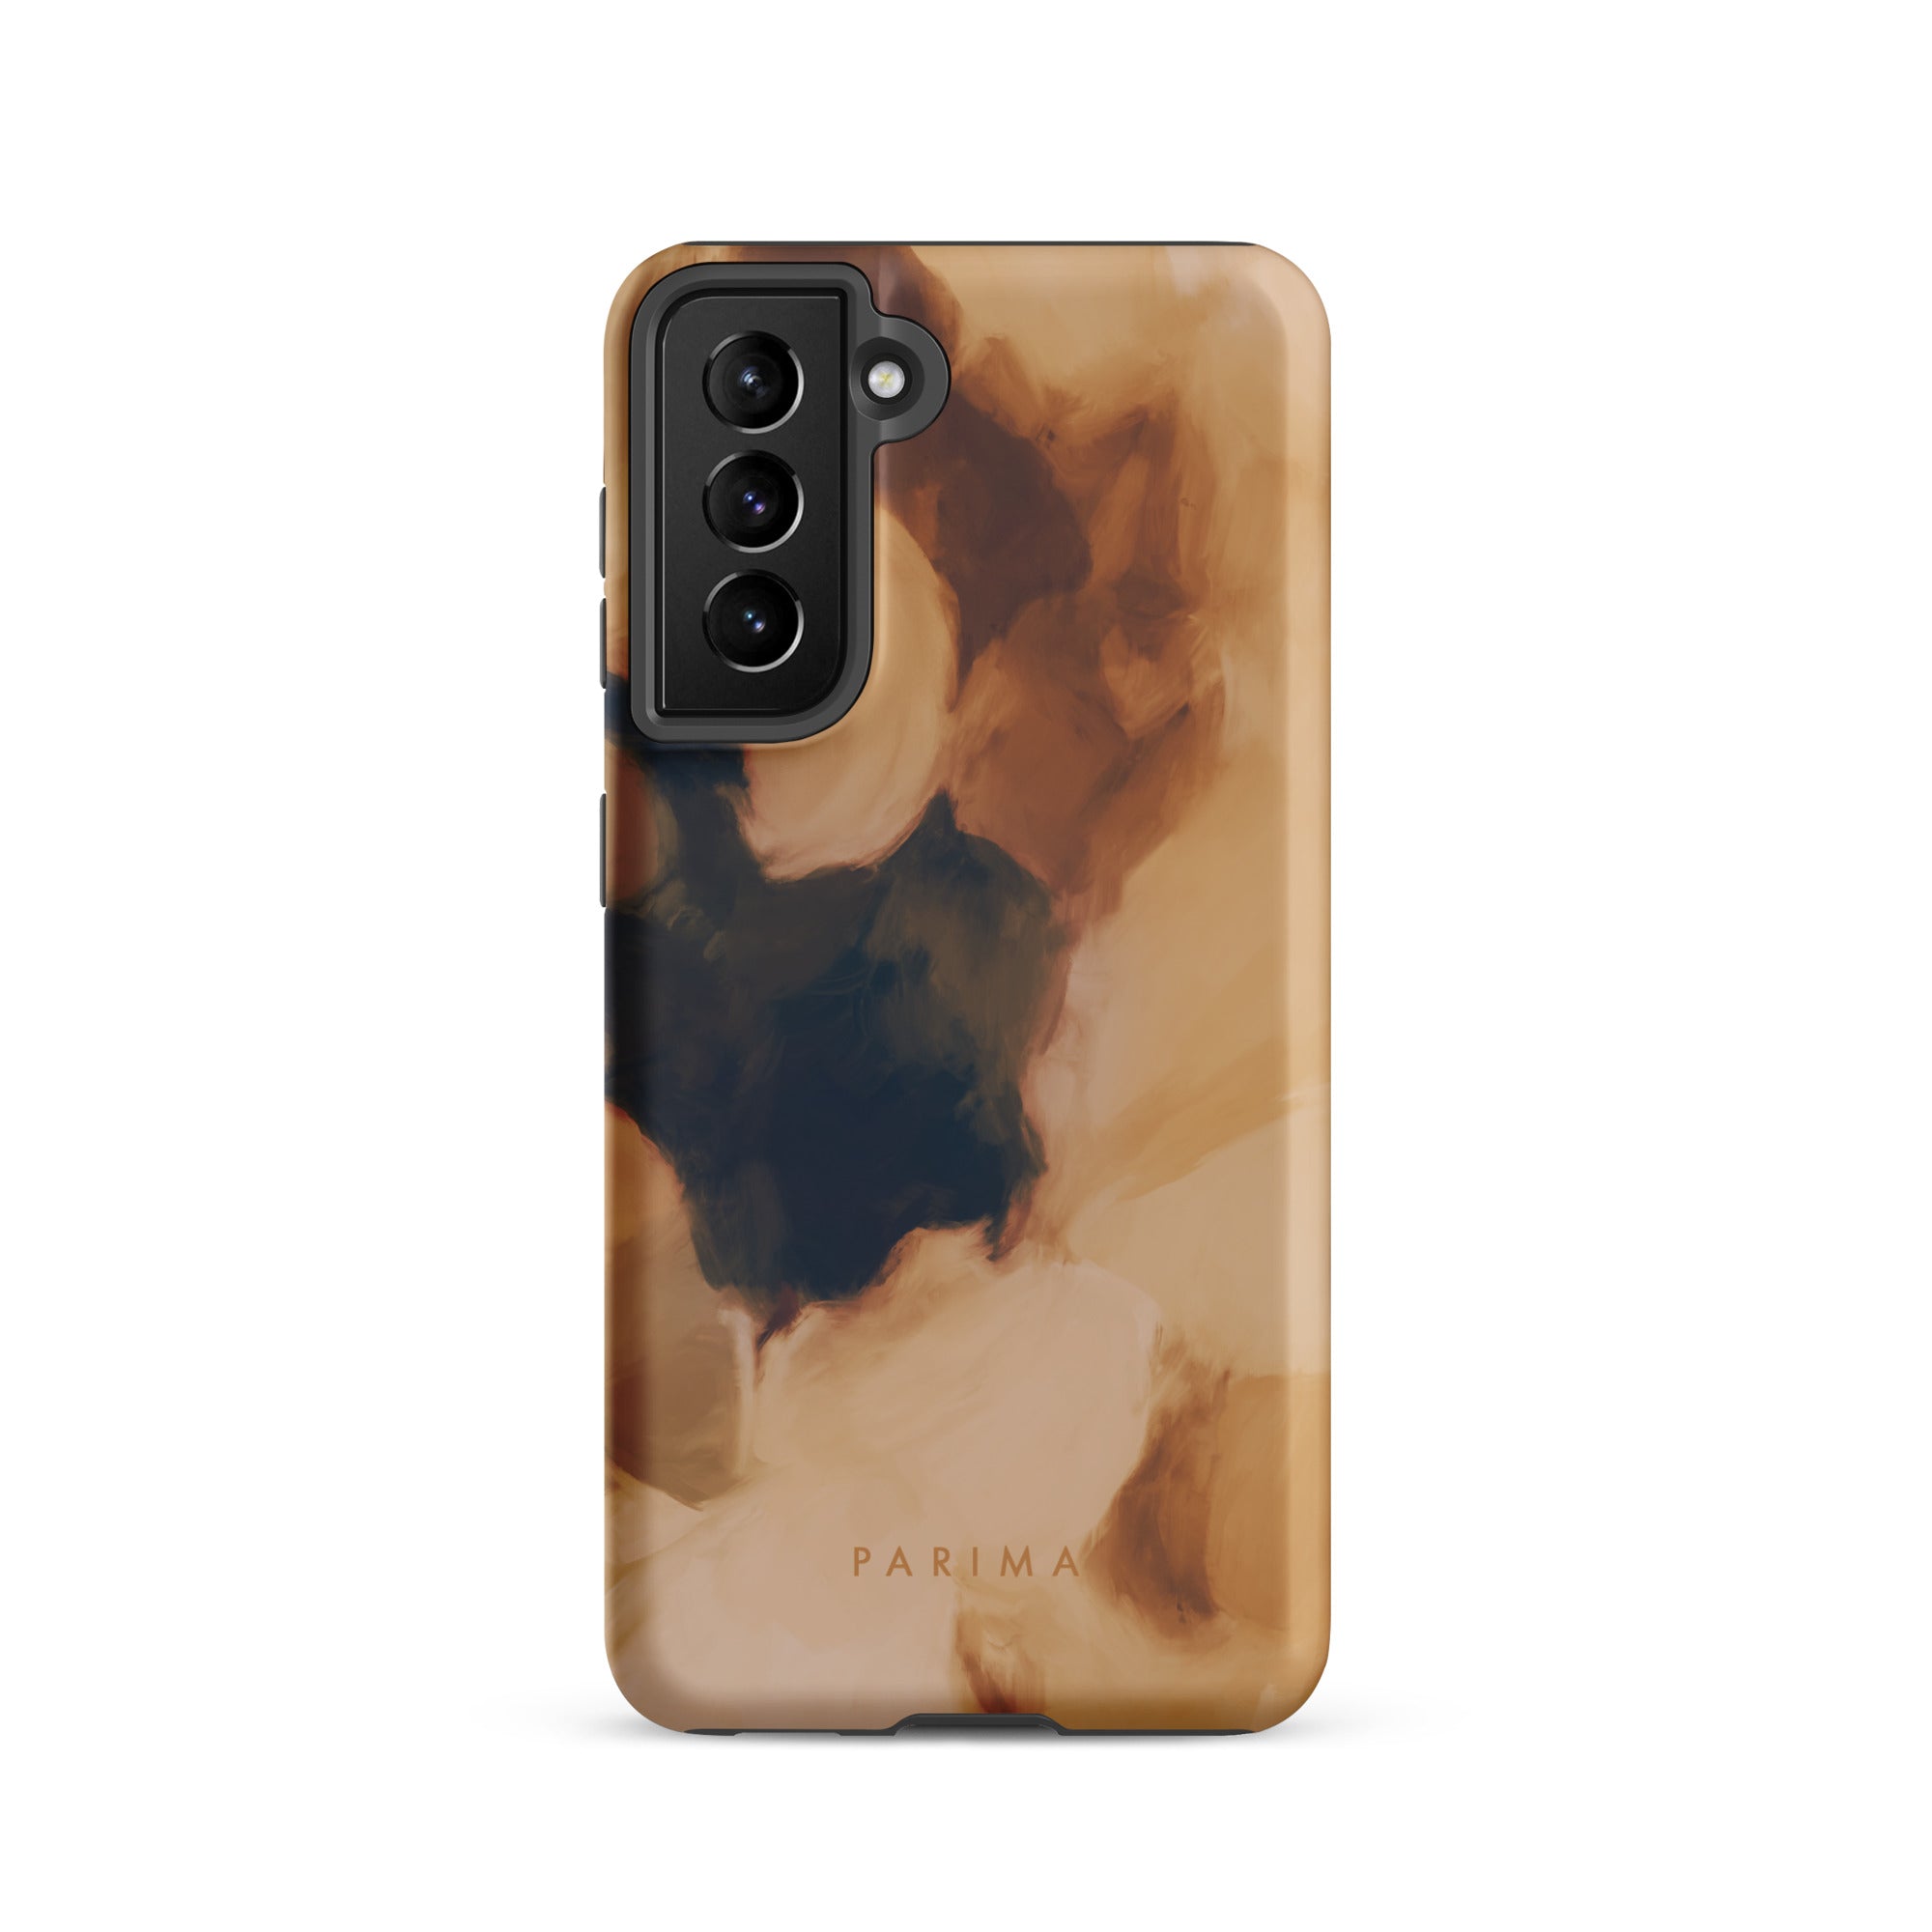 Clay, brown and tan color abstract art on Samsung Galaxy s21 tough case by Parima Studio